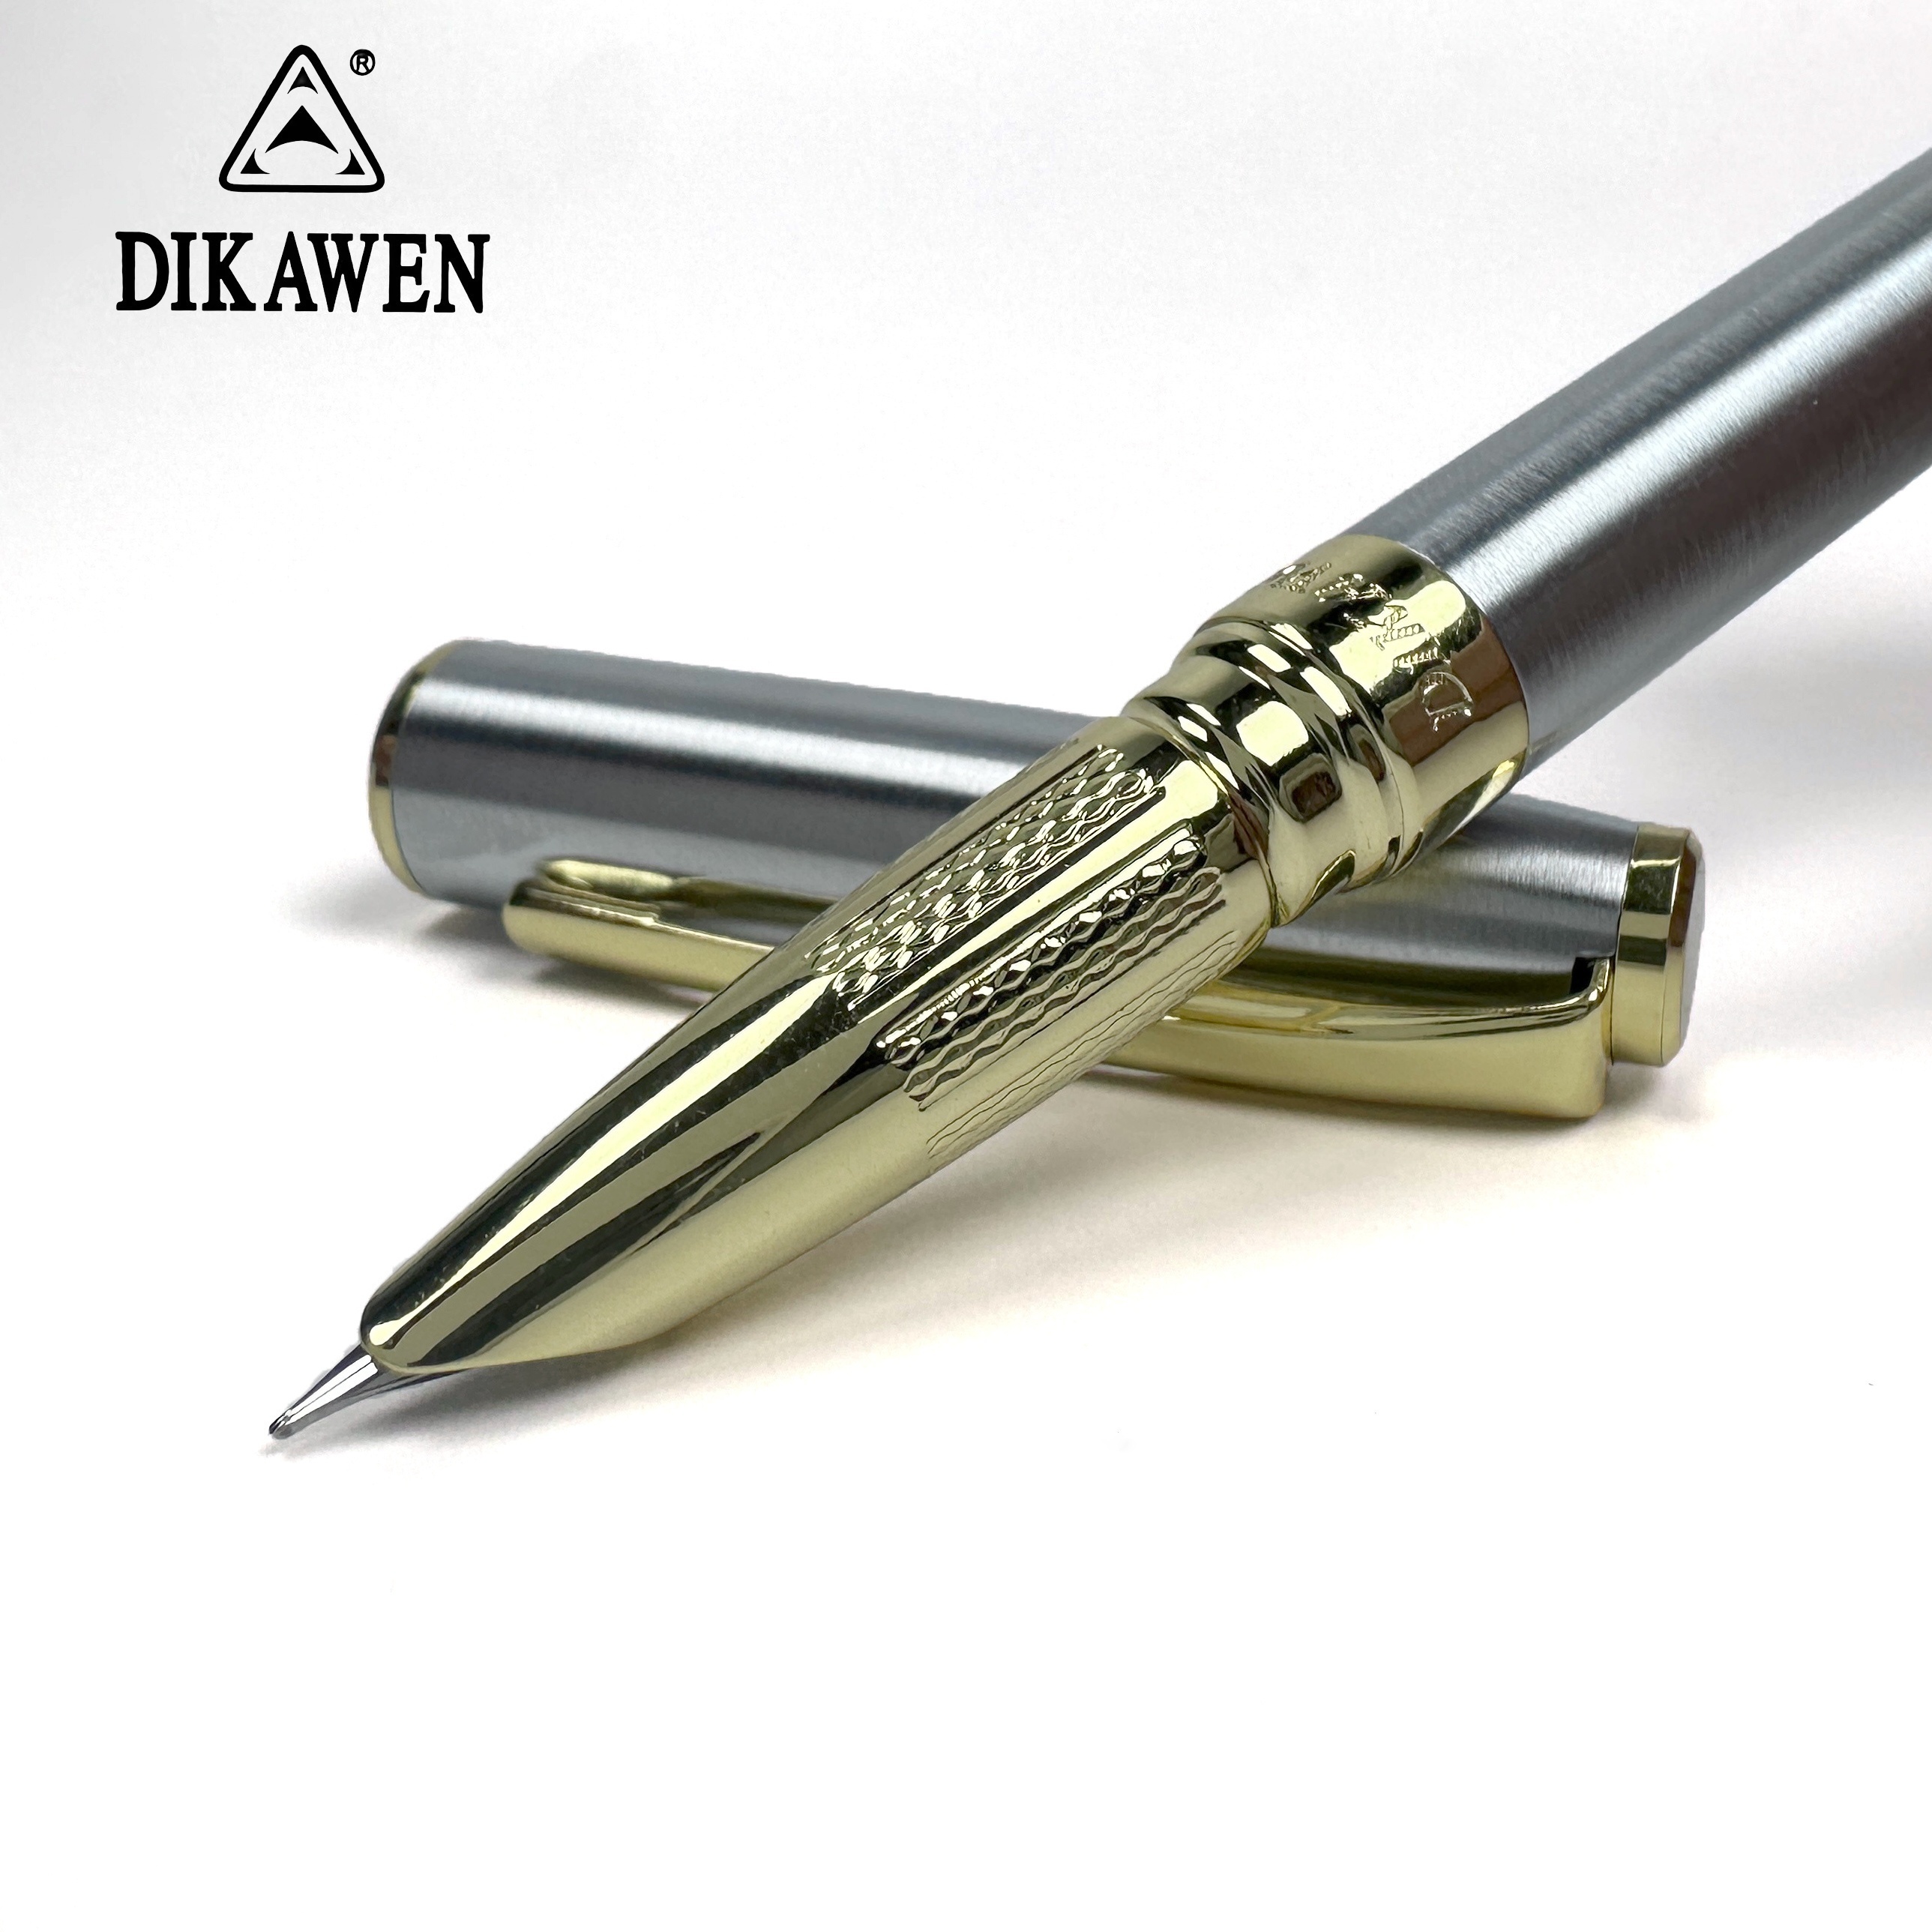 

Dikawen 1pc Luxury Quality Metal Pen Fountain Pen - A8075 0.38mm Fountain Pen Business Office Student Practice Writing Stationery Gift Fountain Pen, Back To School, School Supplies